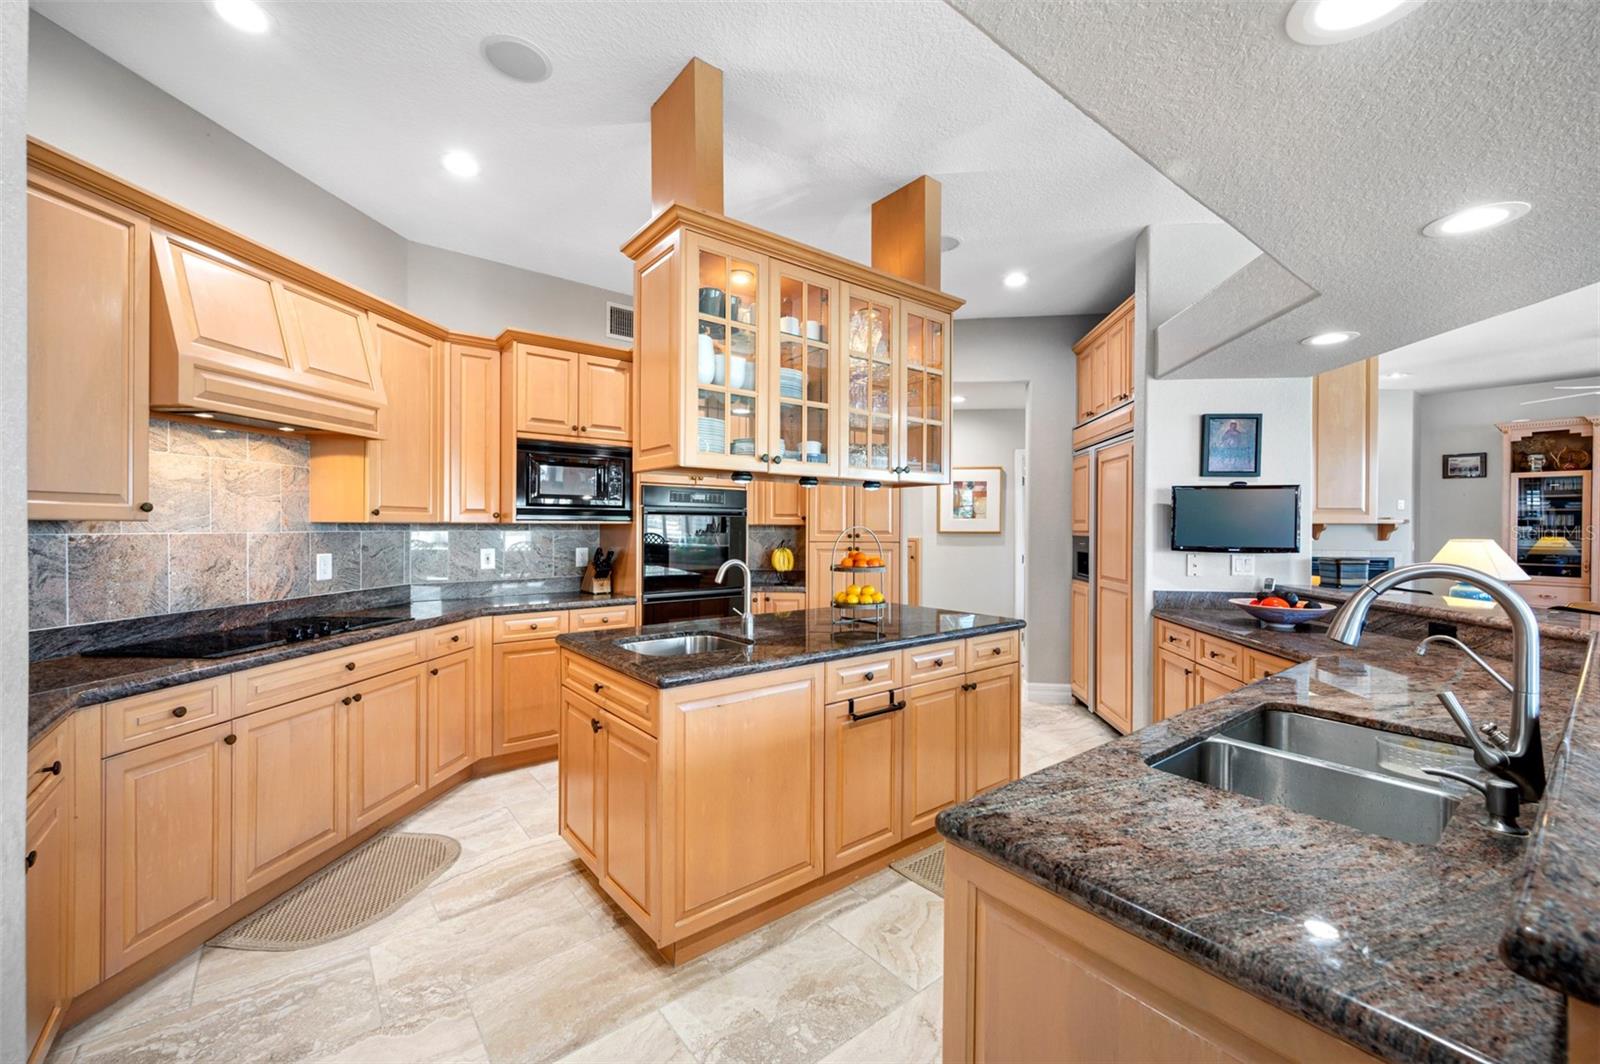 Kitchen features include GE electric cooktop, hood/fan, Dacor double oven, Whirlpool built-in microwave, island bar sink, double stainless steel sink, garbage disposal, reverse osmosis water faucet, Bosch dishwasher, and 48" KitchenAid refrigerator/freezer with water dispenser and ice maker